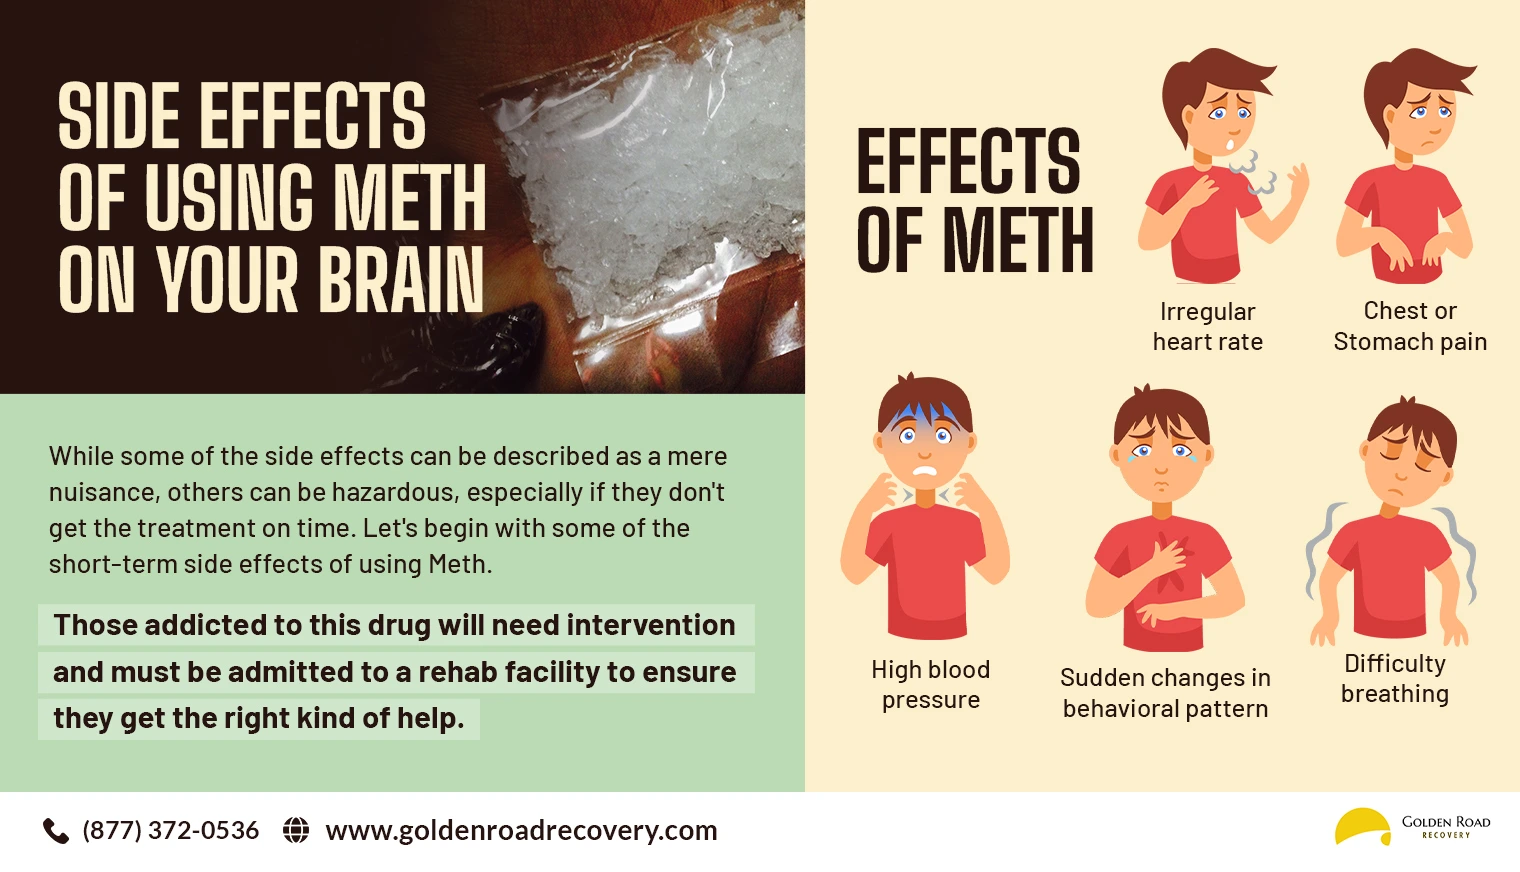 side effects of meth on your brain